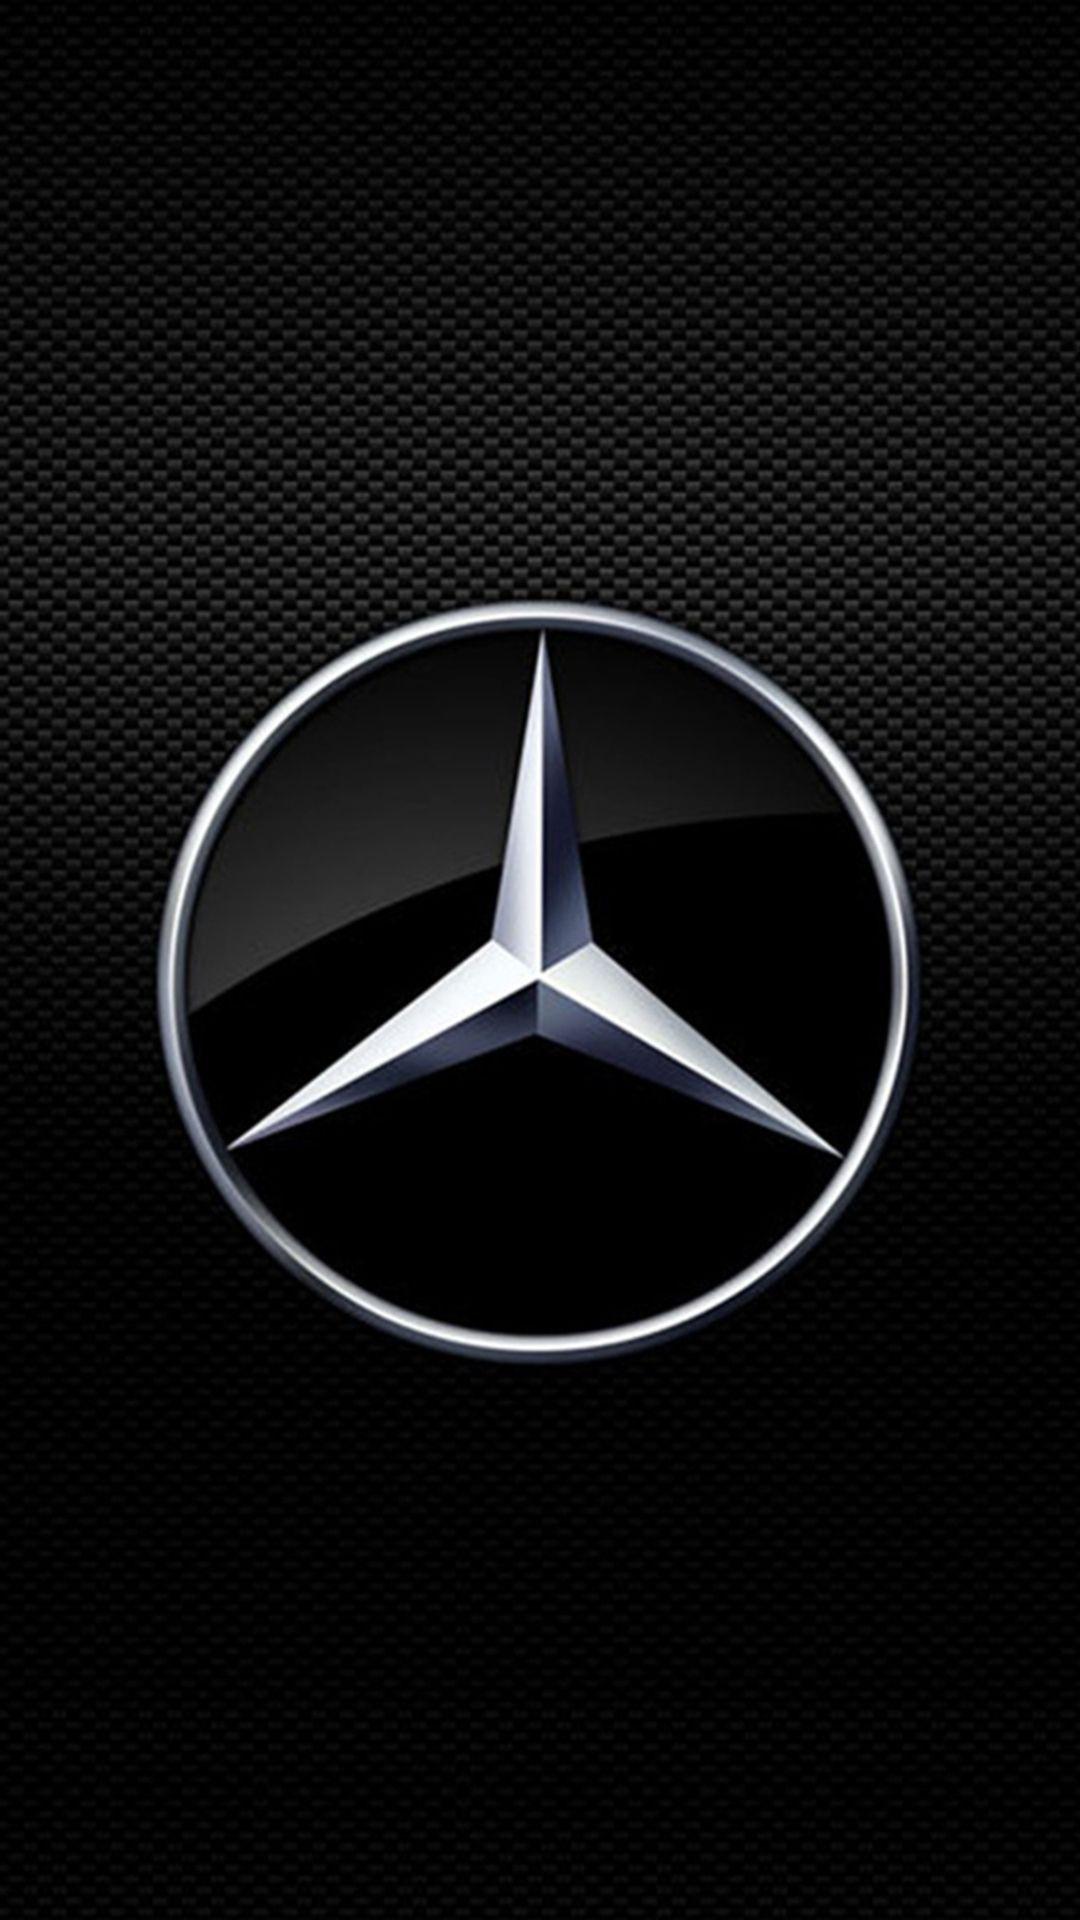 Mercedes Benz Symbol, The Ultimate Symbol Of Quality, Luxury